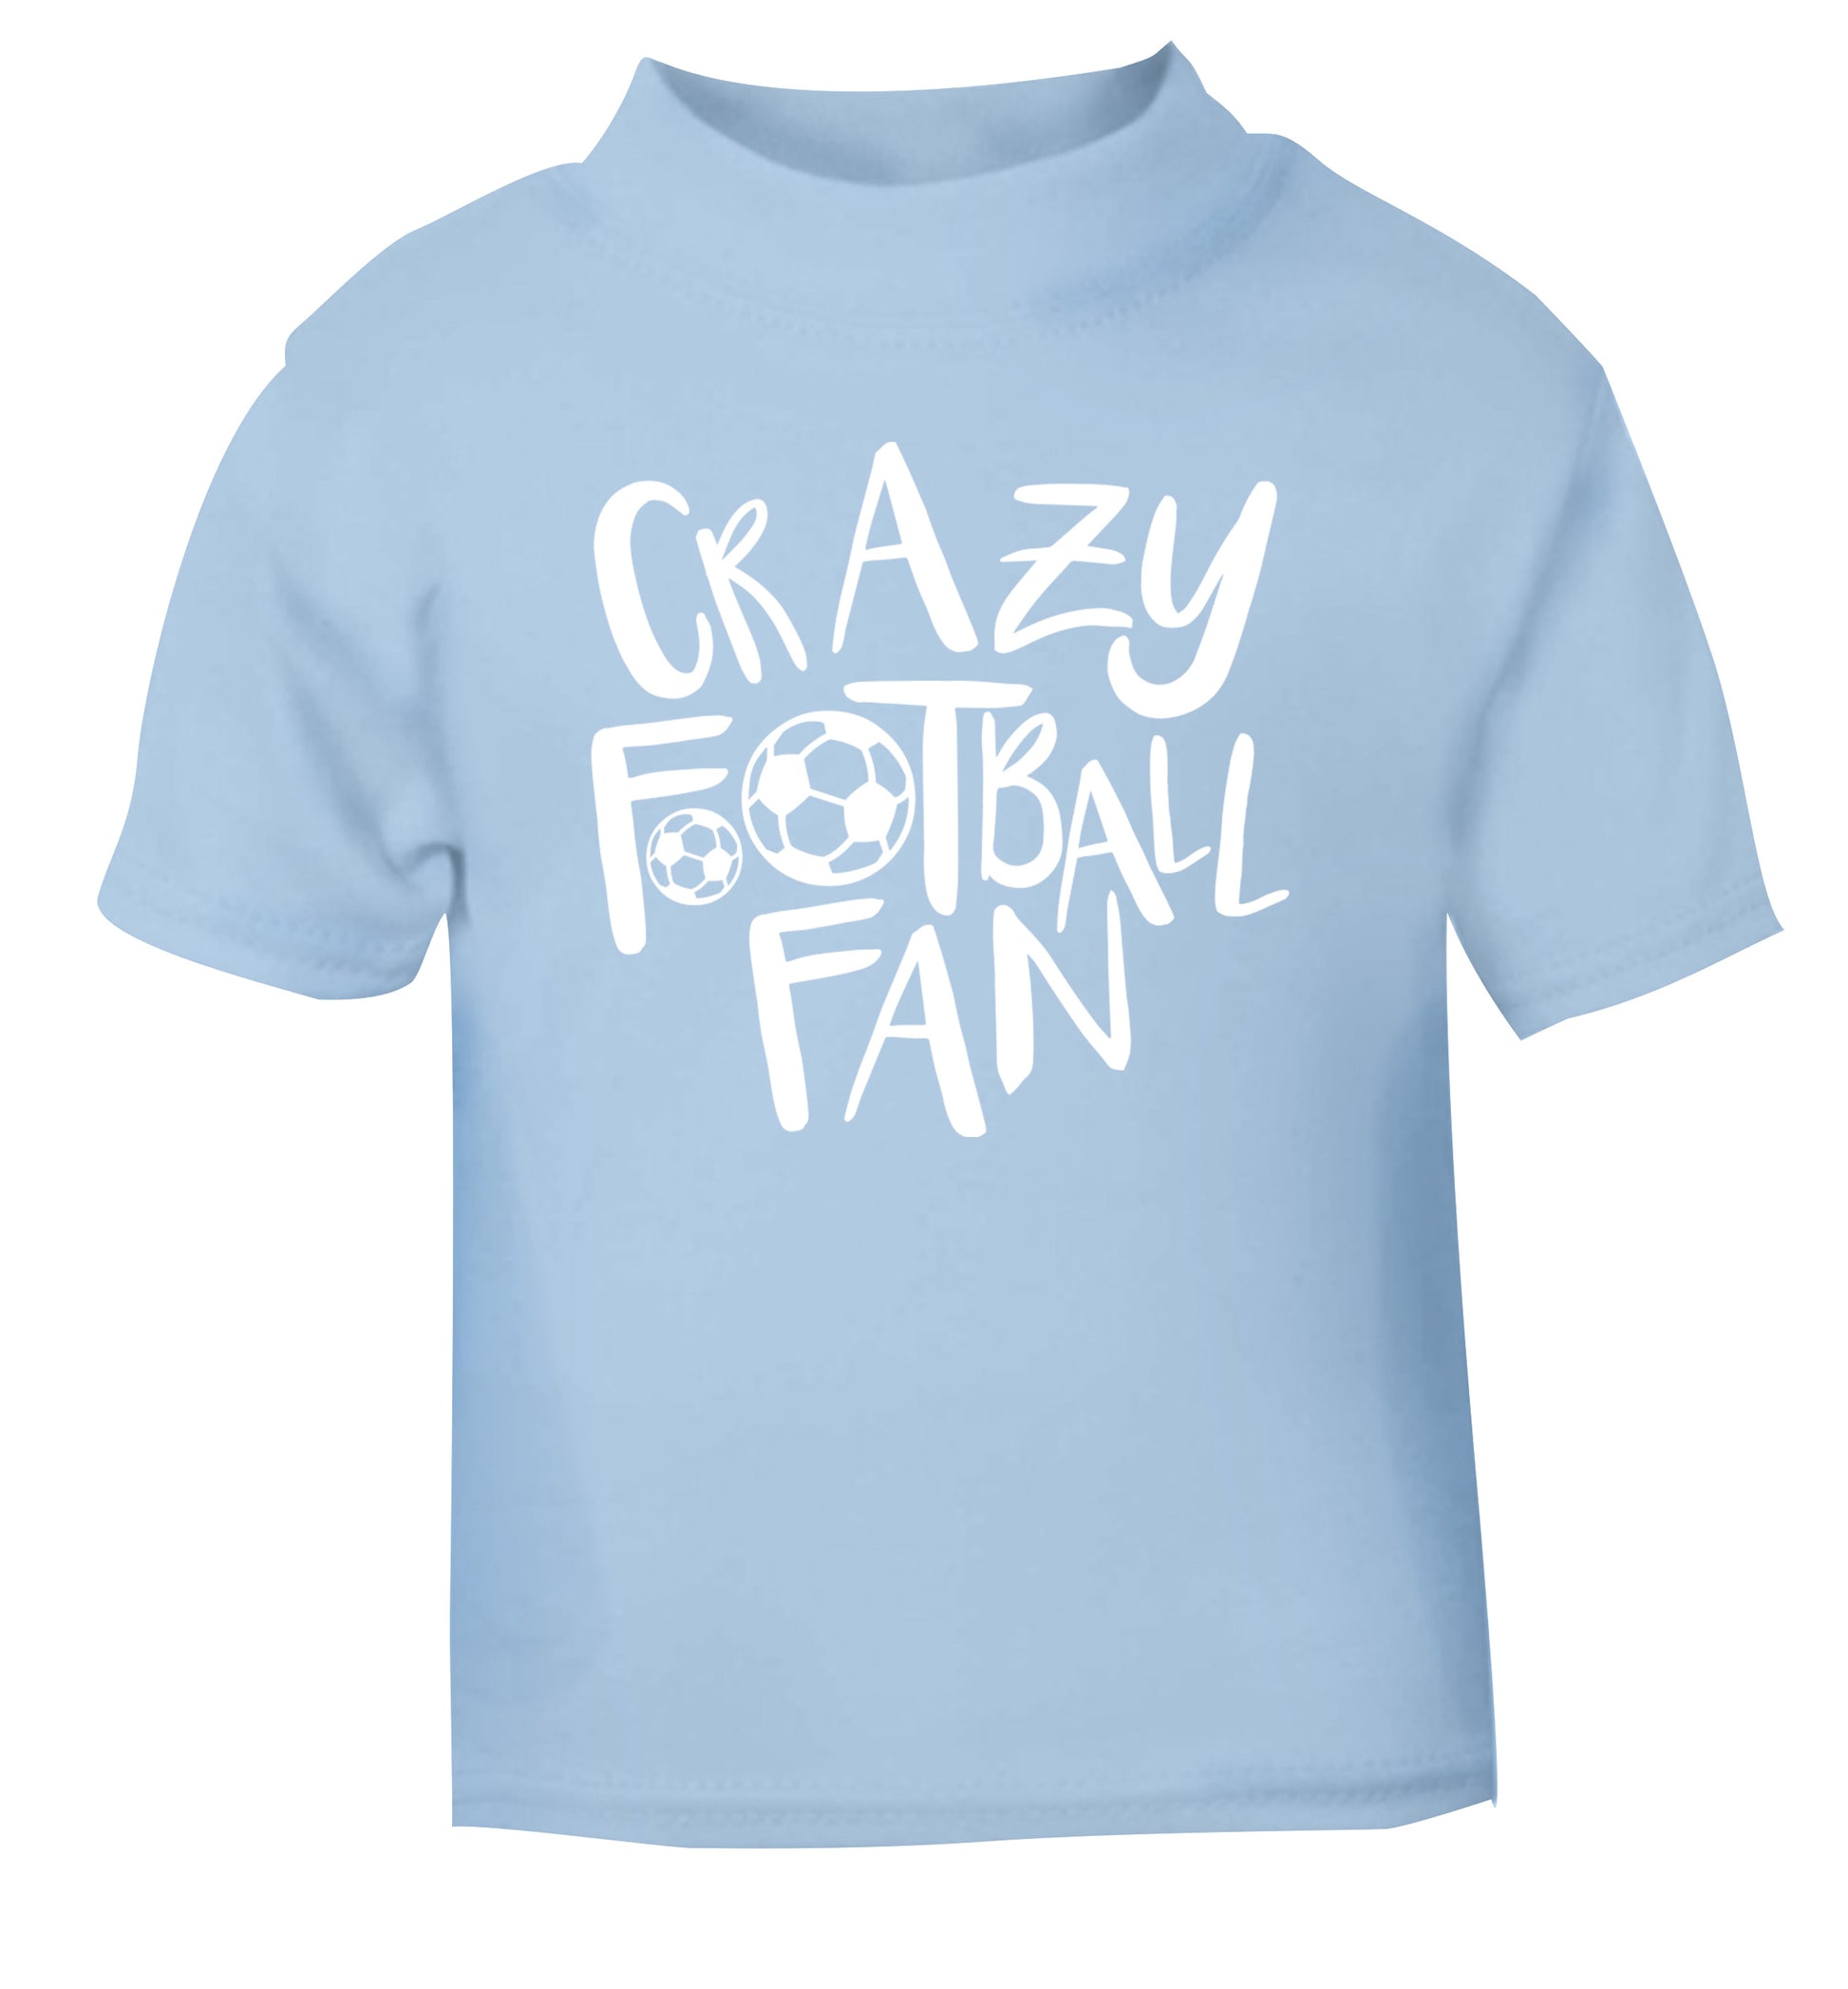 Crazy football fan light blue Baby Toddler Tshirt 2 Years